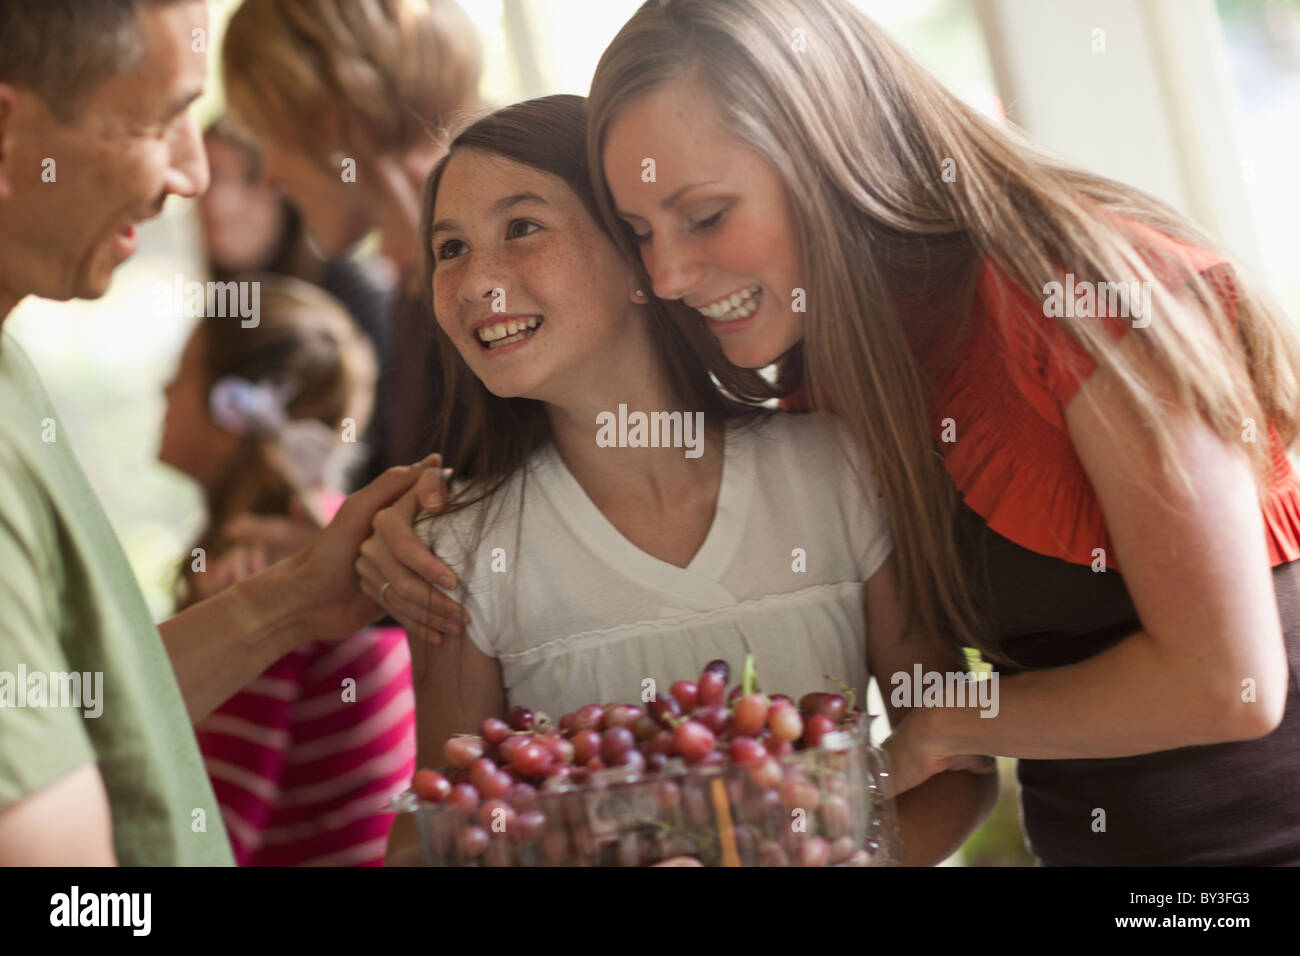 Girl (10 -11,) with family during celebration event Stock Photo